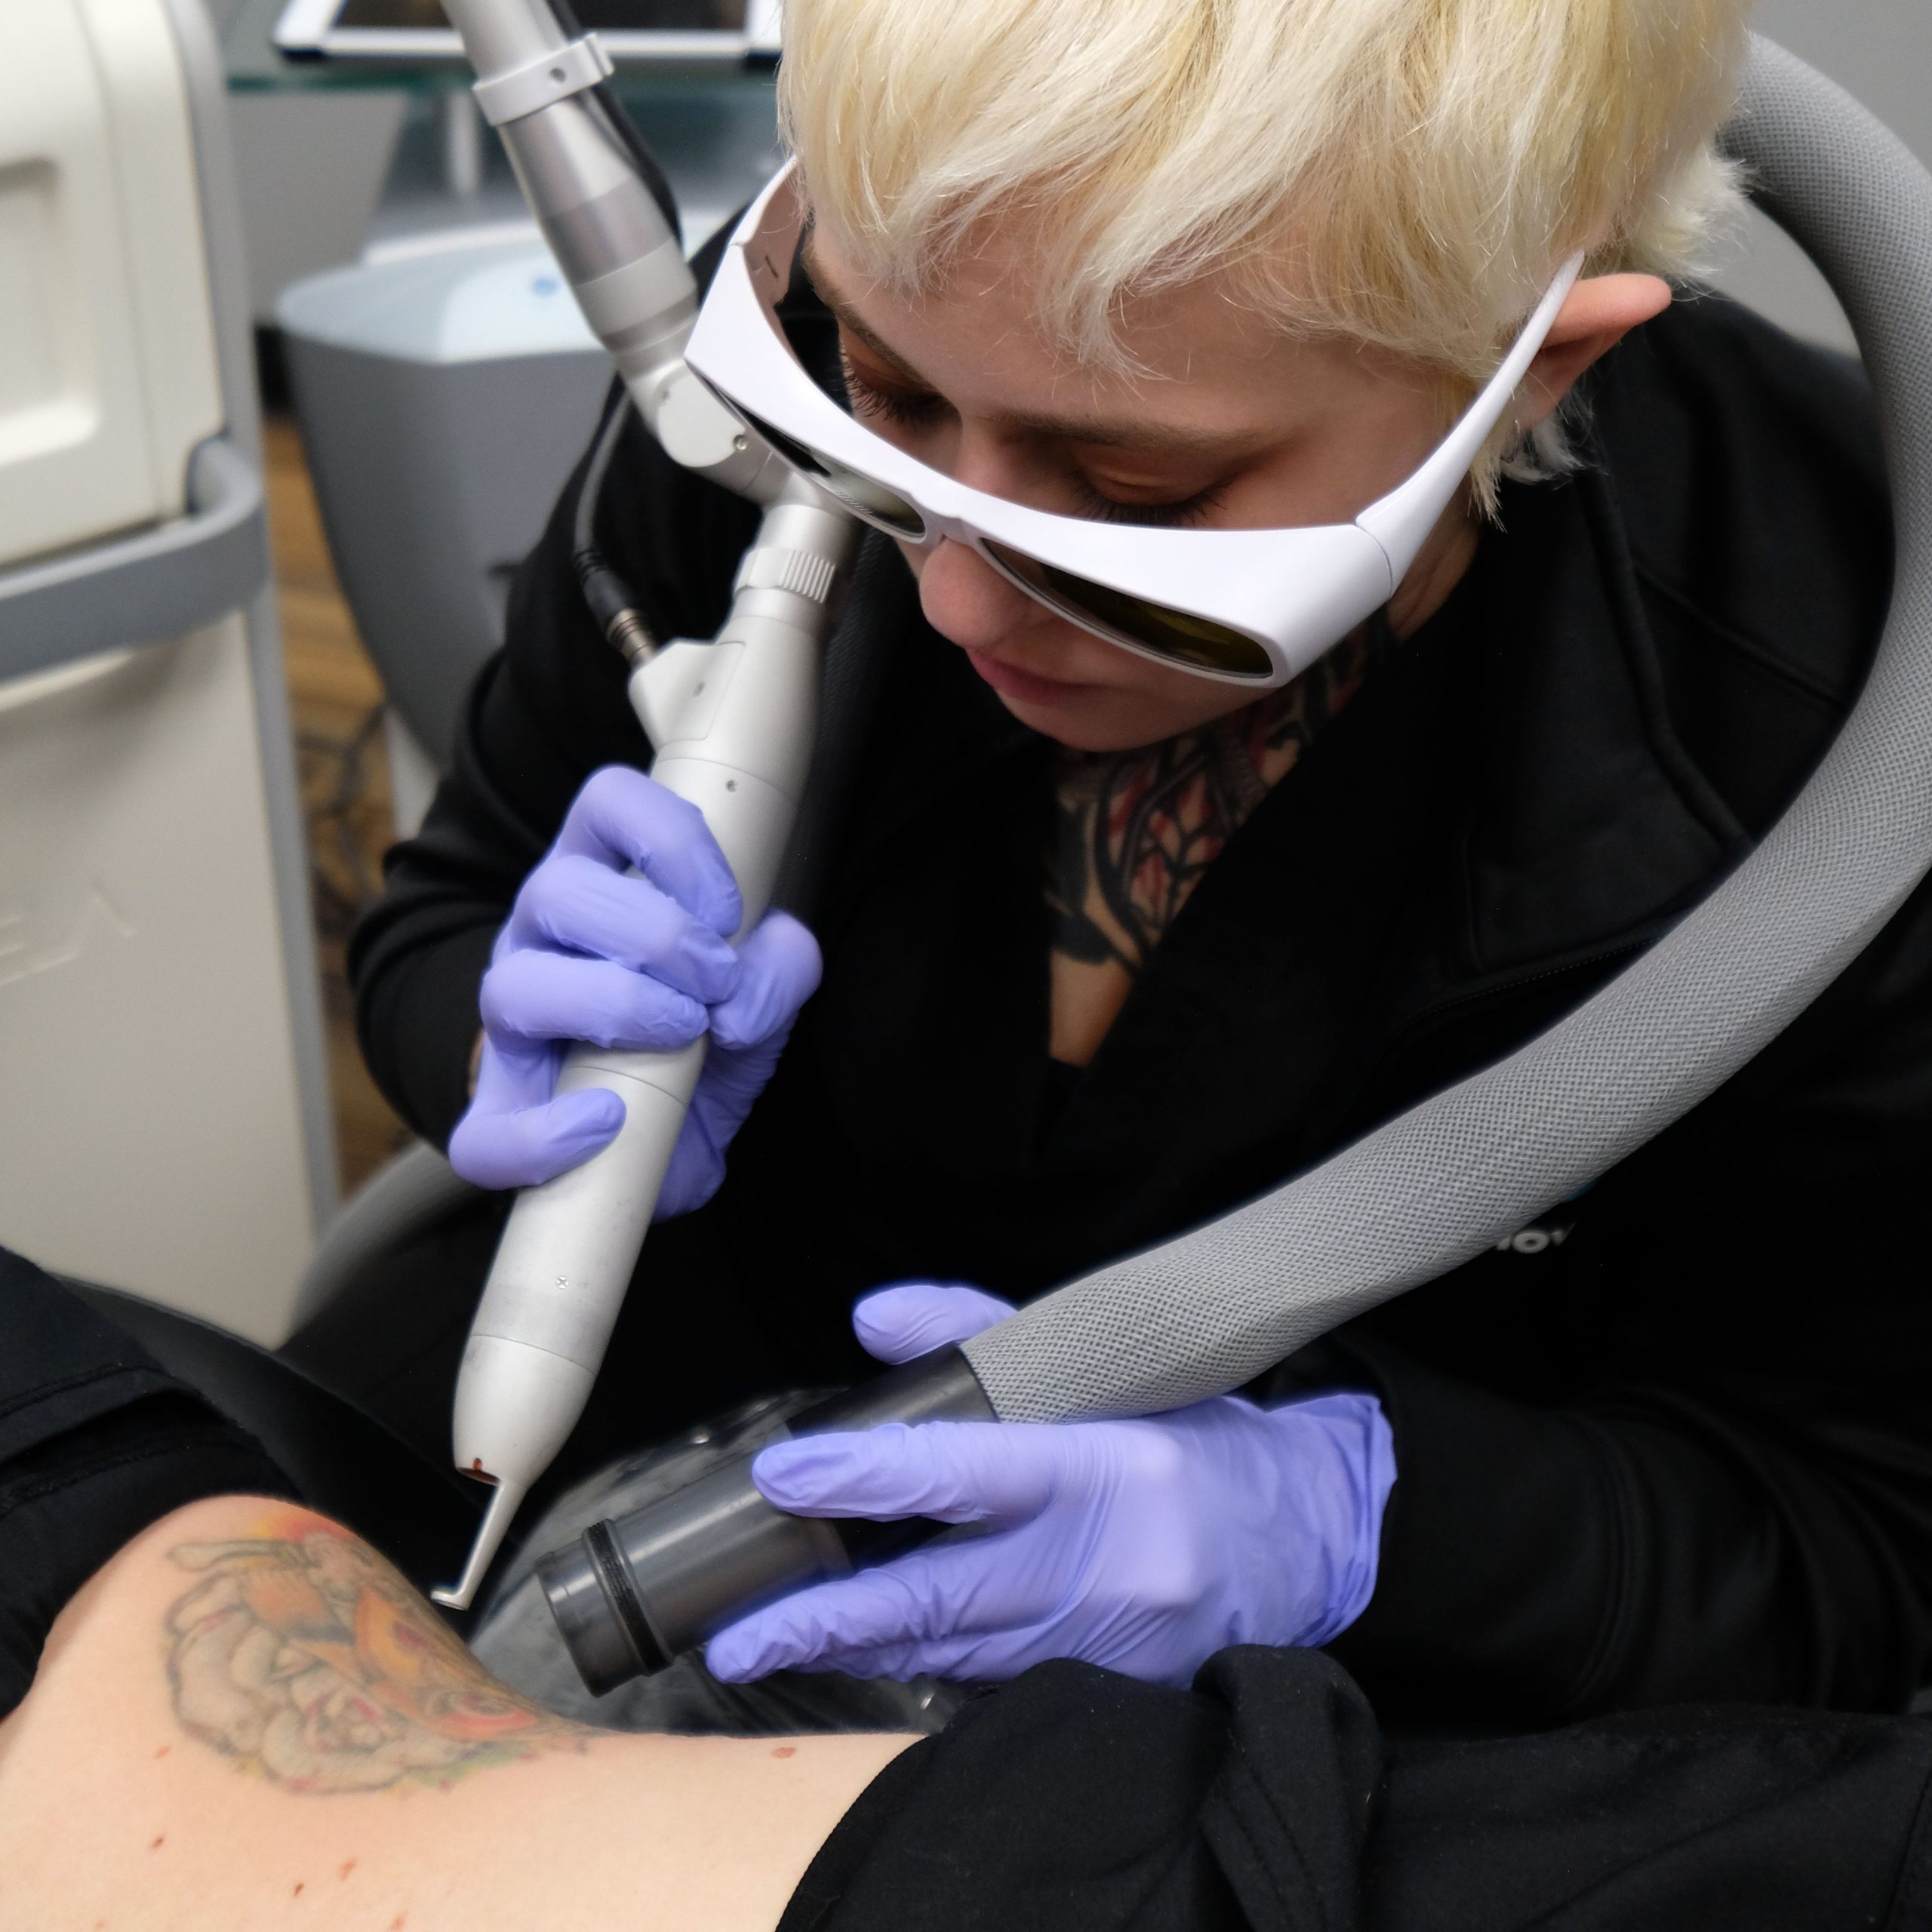 A major advance in laser technology for tattoo removal